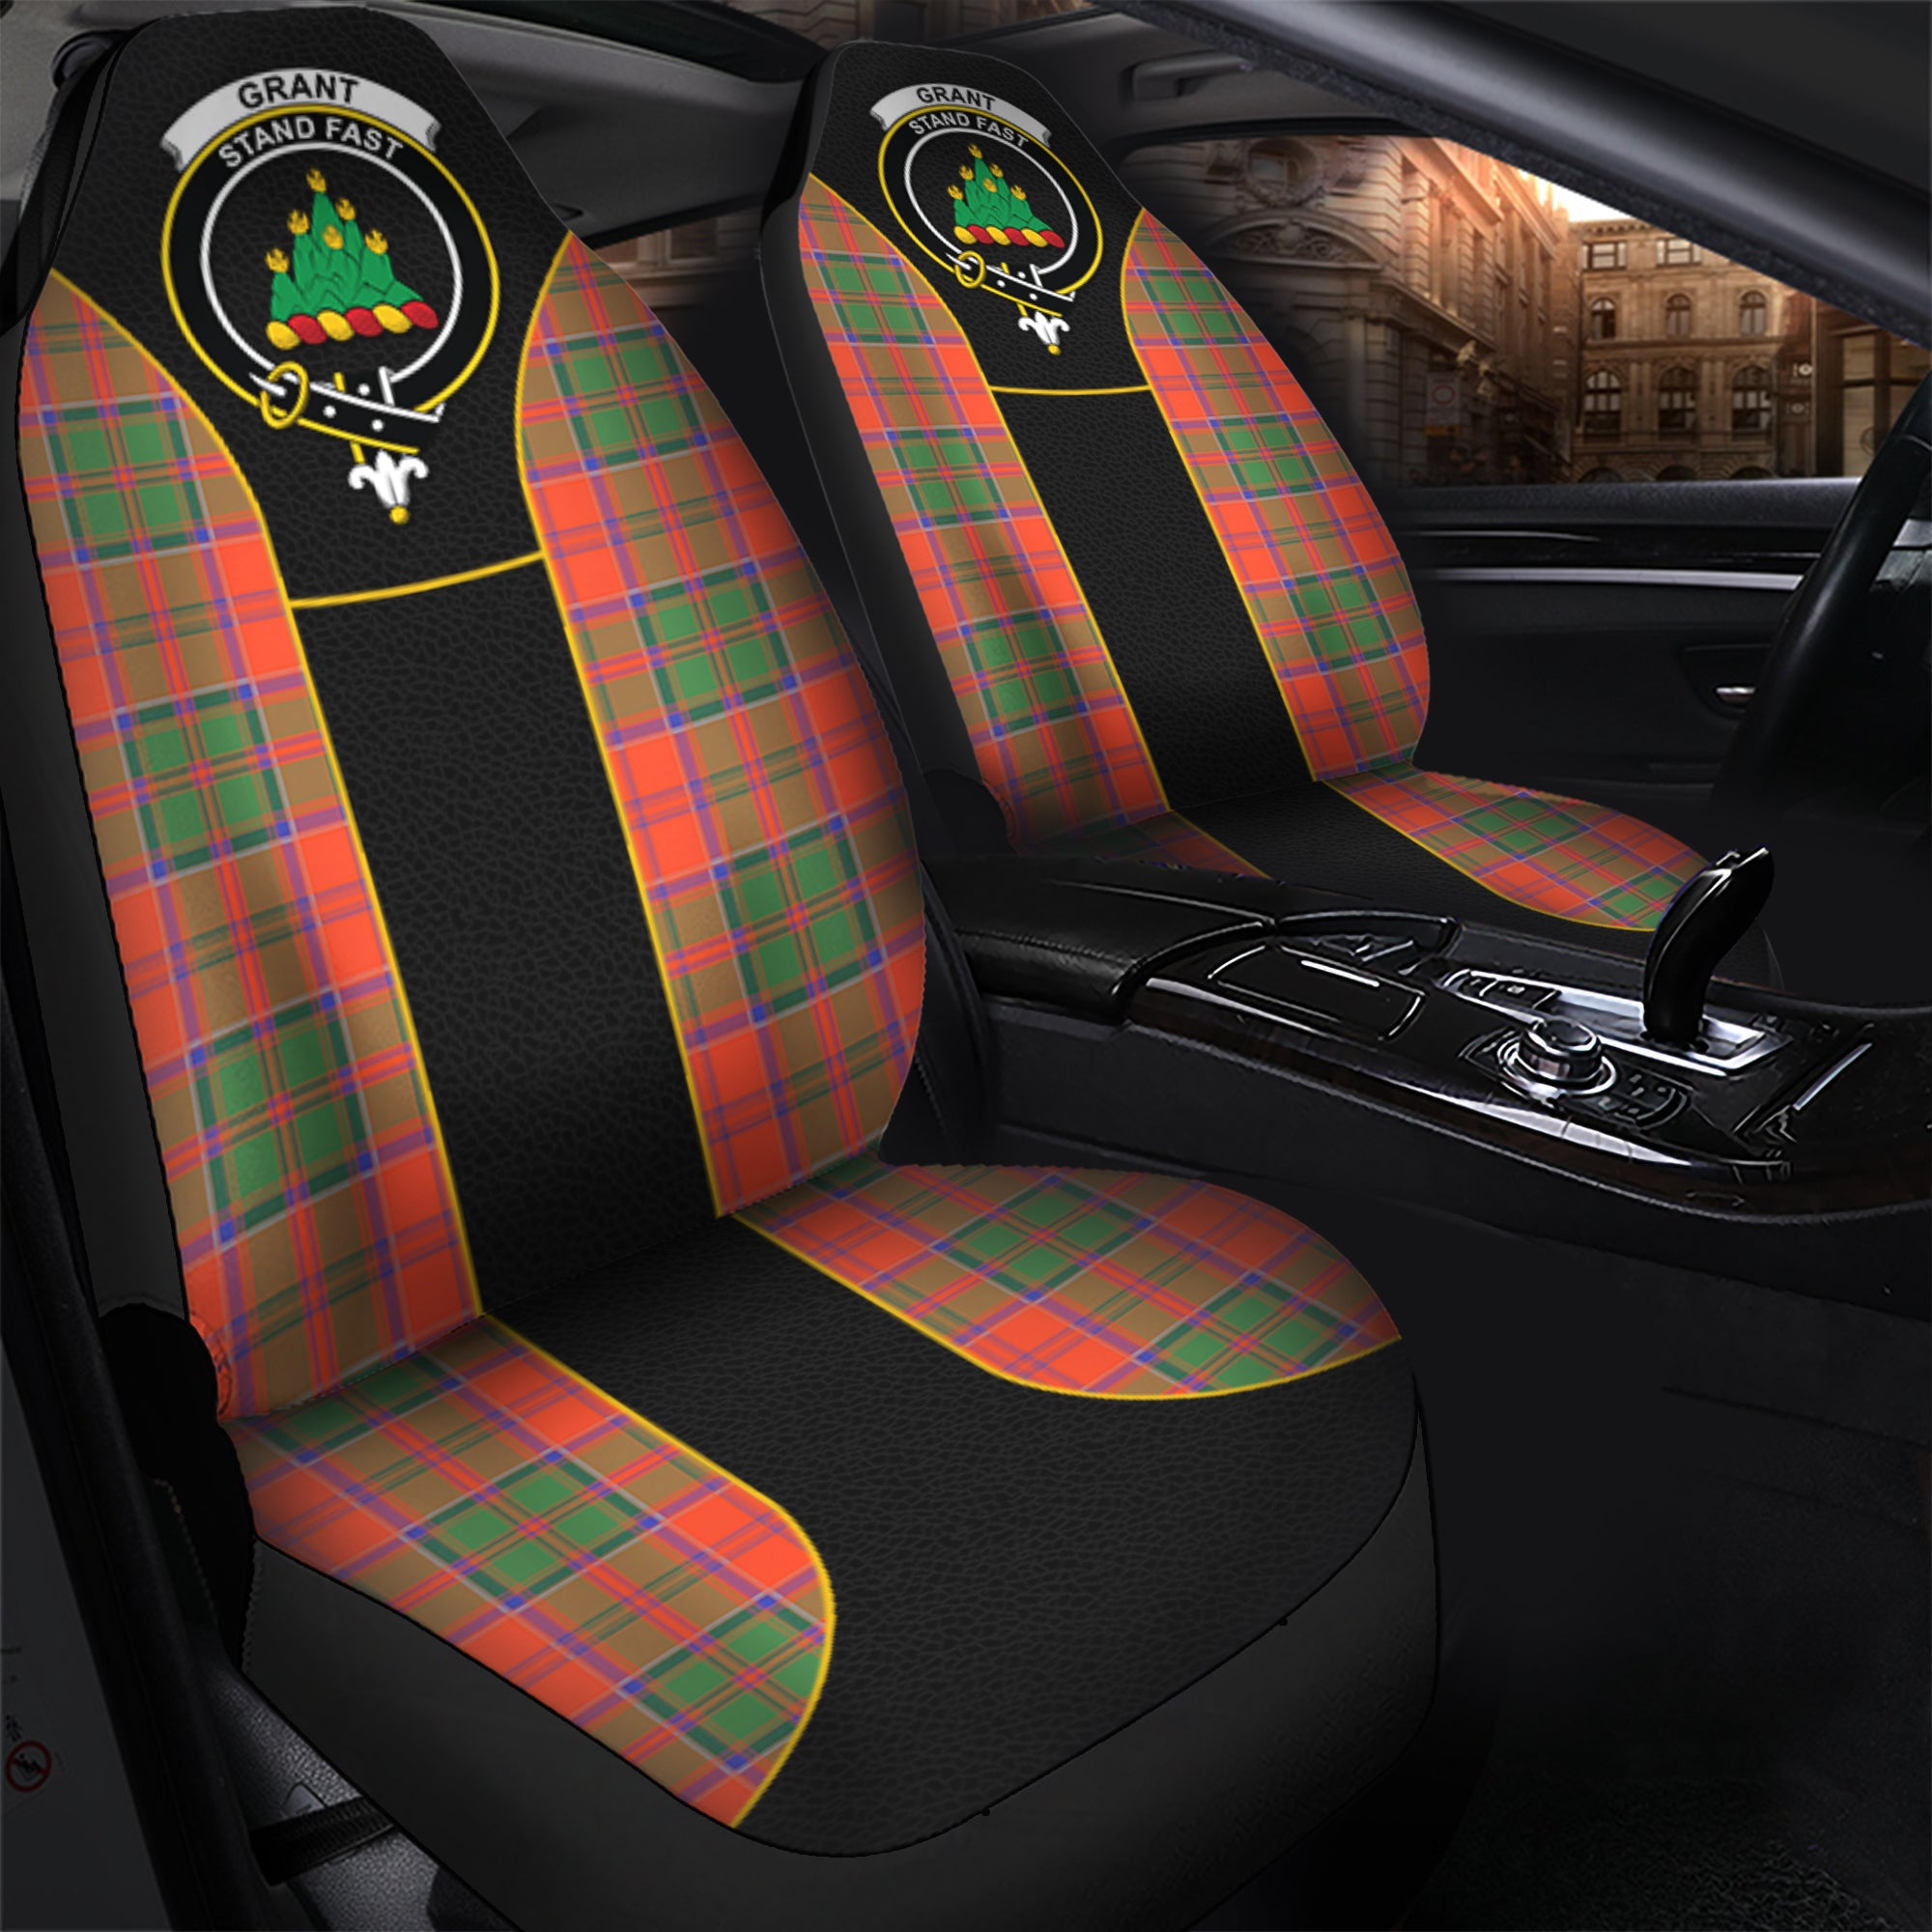 scottish-grant-ancient-tartan-crest-car-seat-cover-special-style